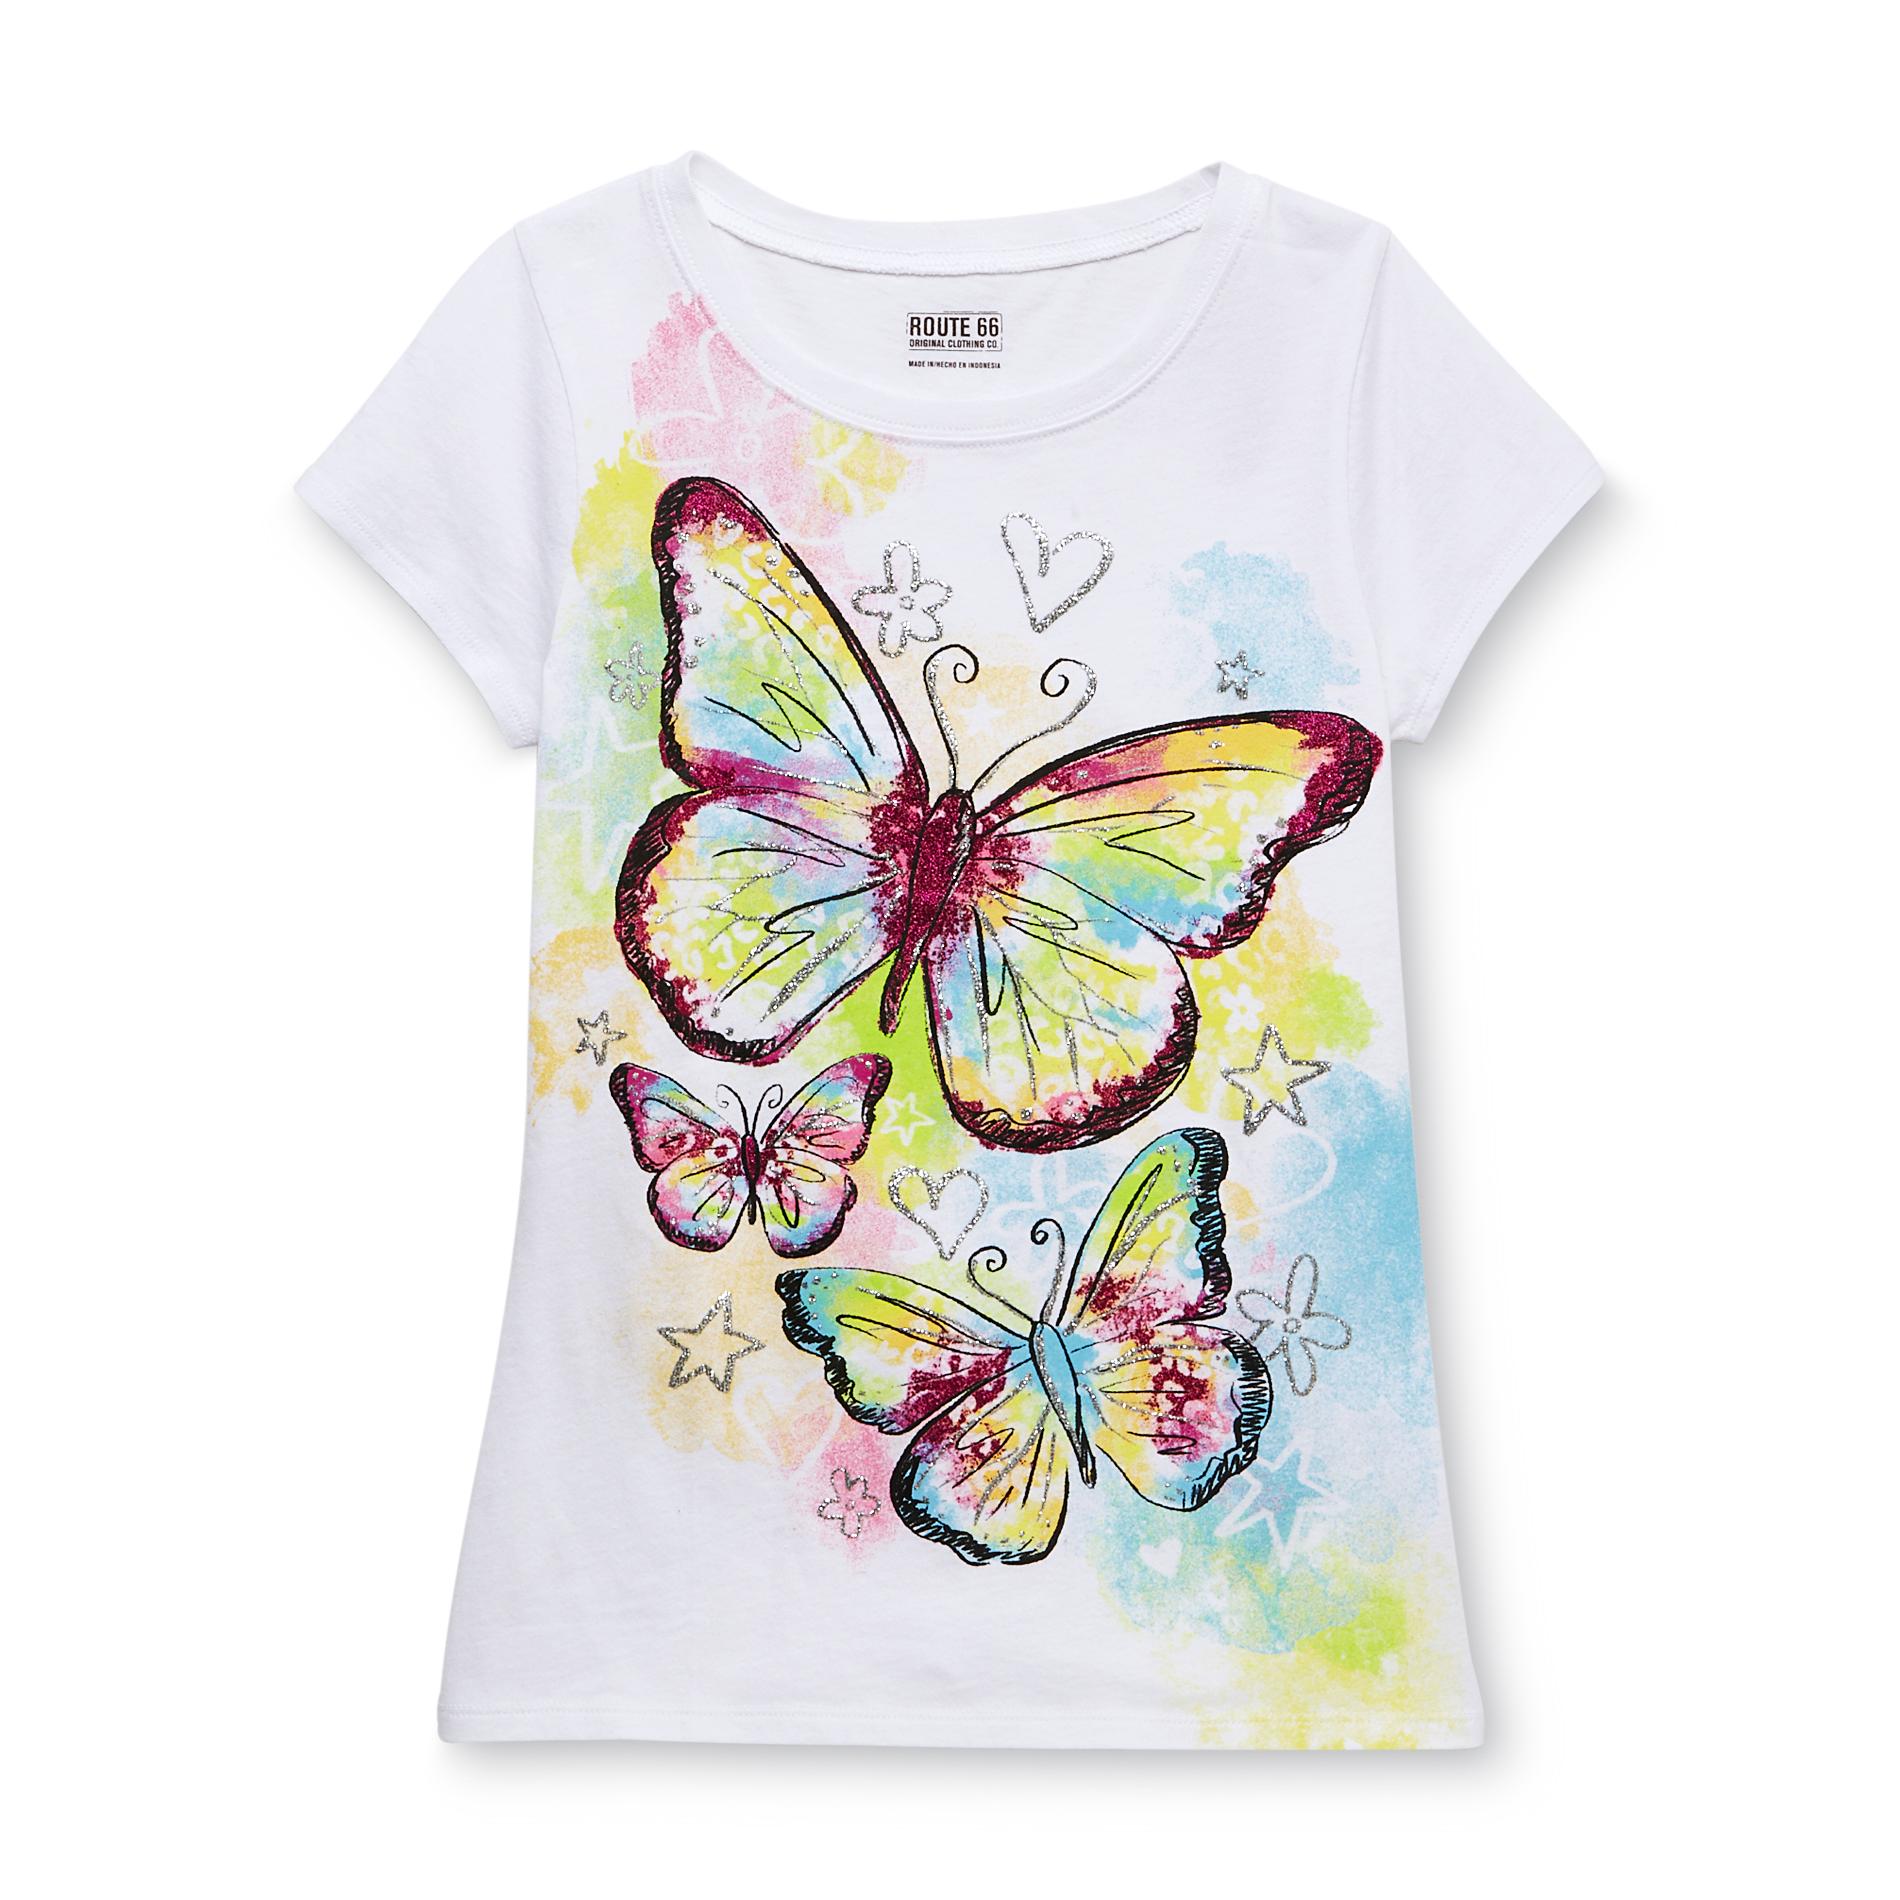 Route 66 Girl's Graphic Short-Sleeve Top - Butterflies